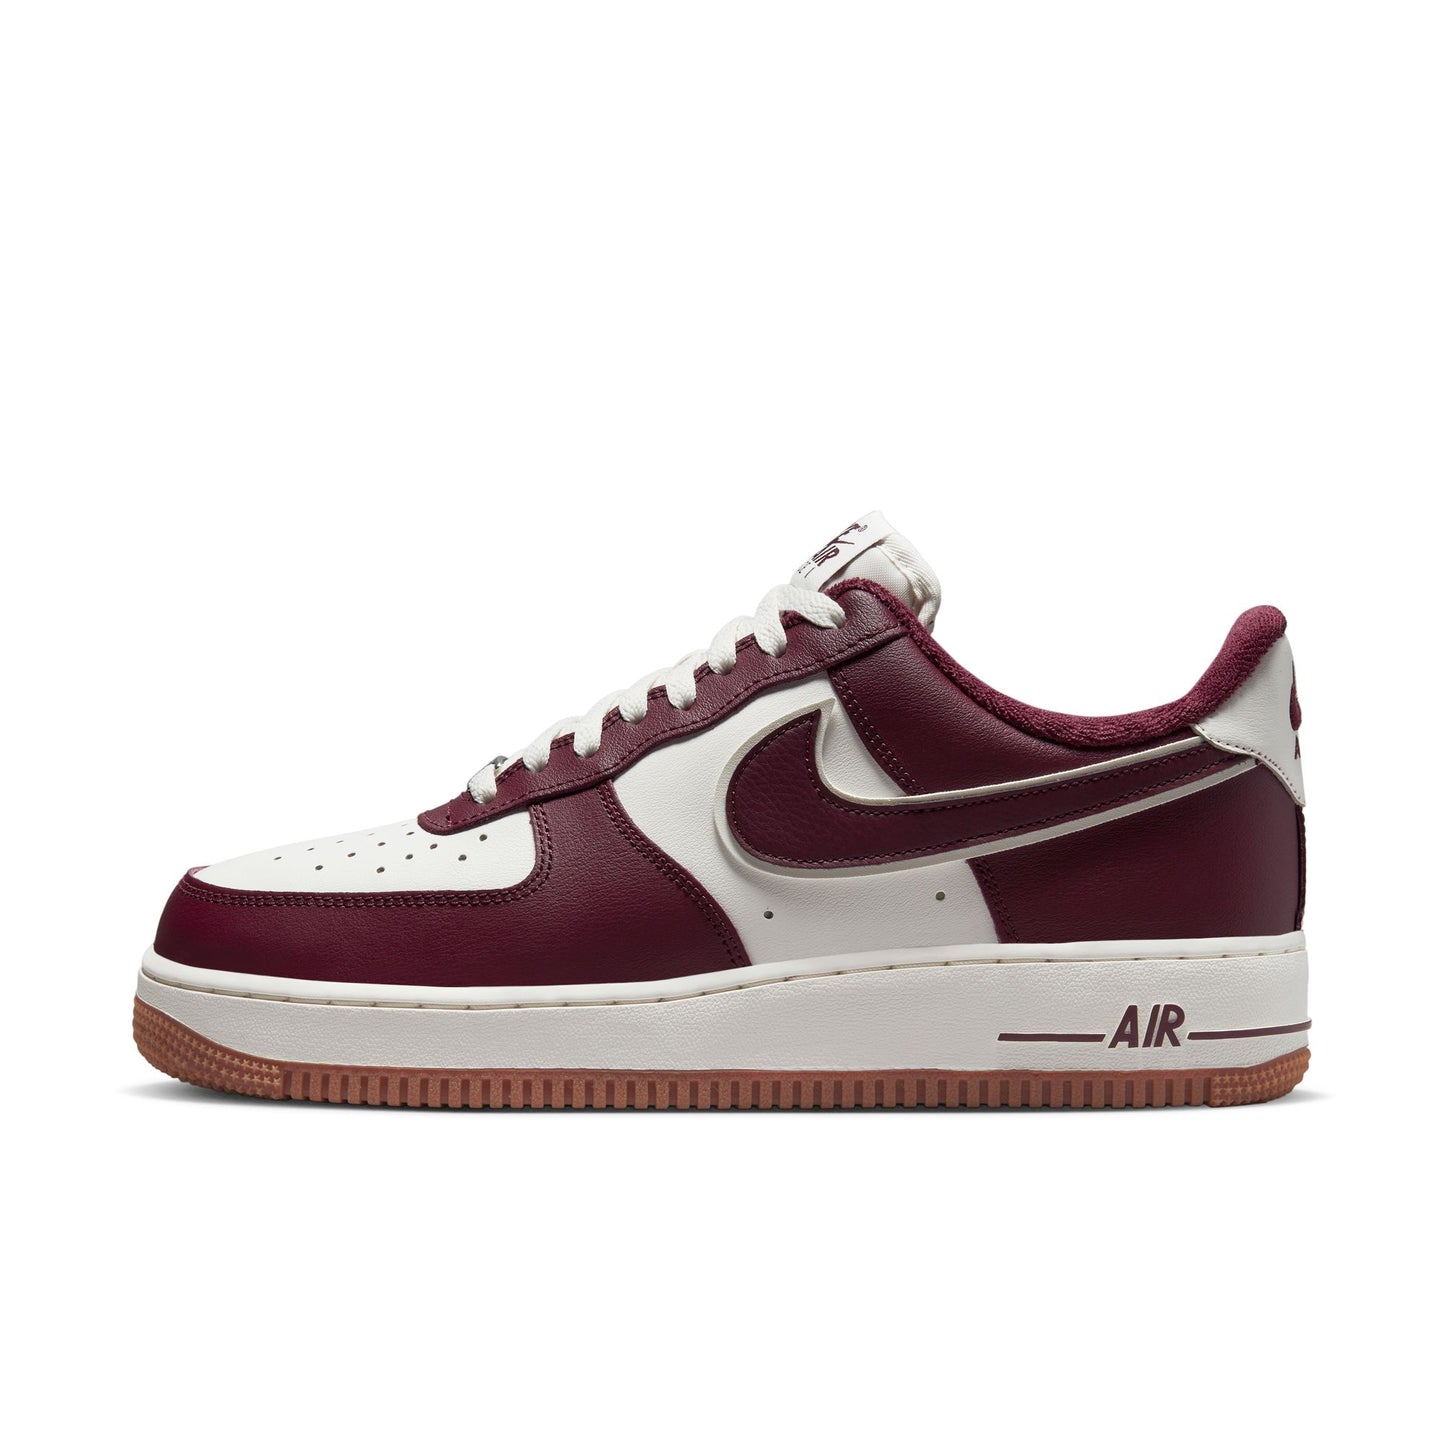 Air Force 1 '07 LV8 – Laced.